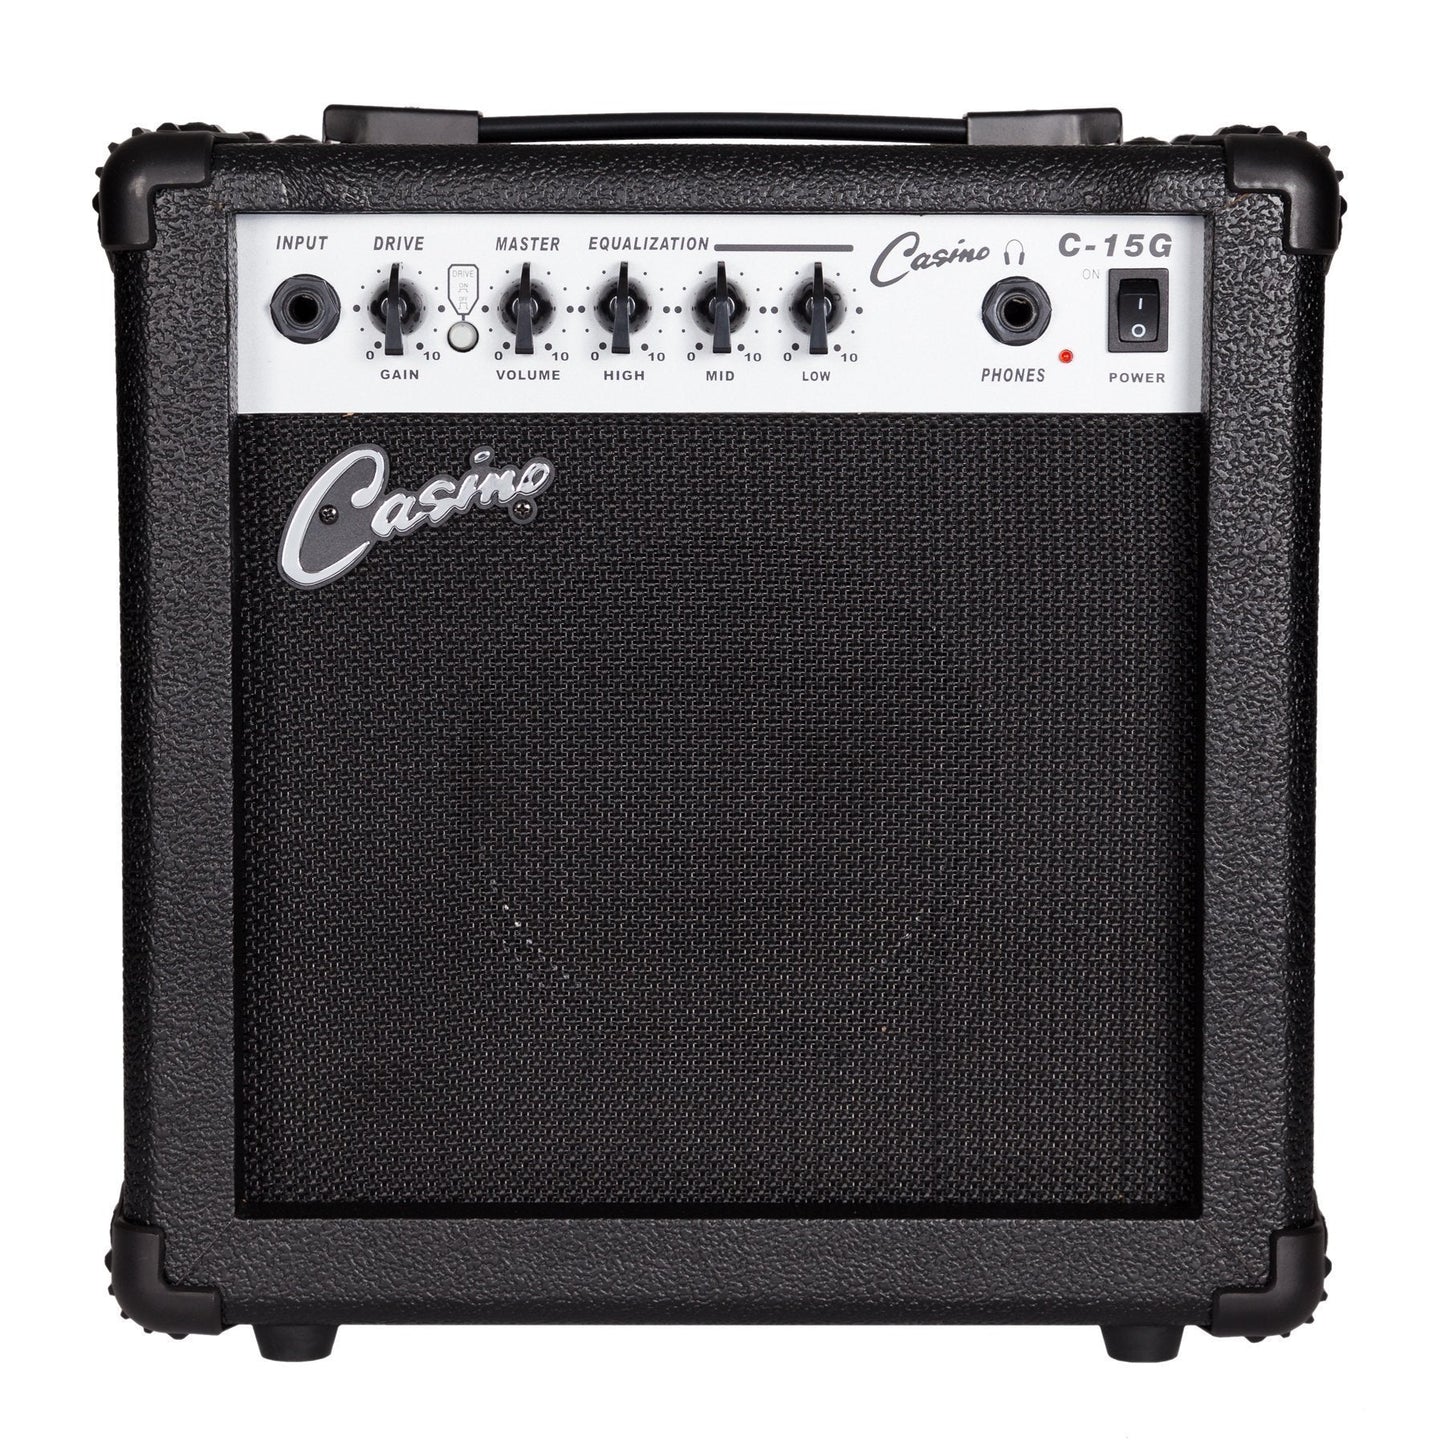 Casino ST-Style Electric Guitar and 15 Watt Amplifier Pack (Black)